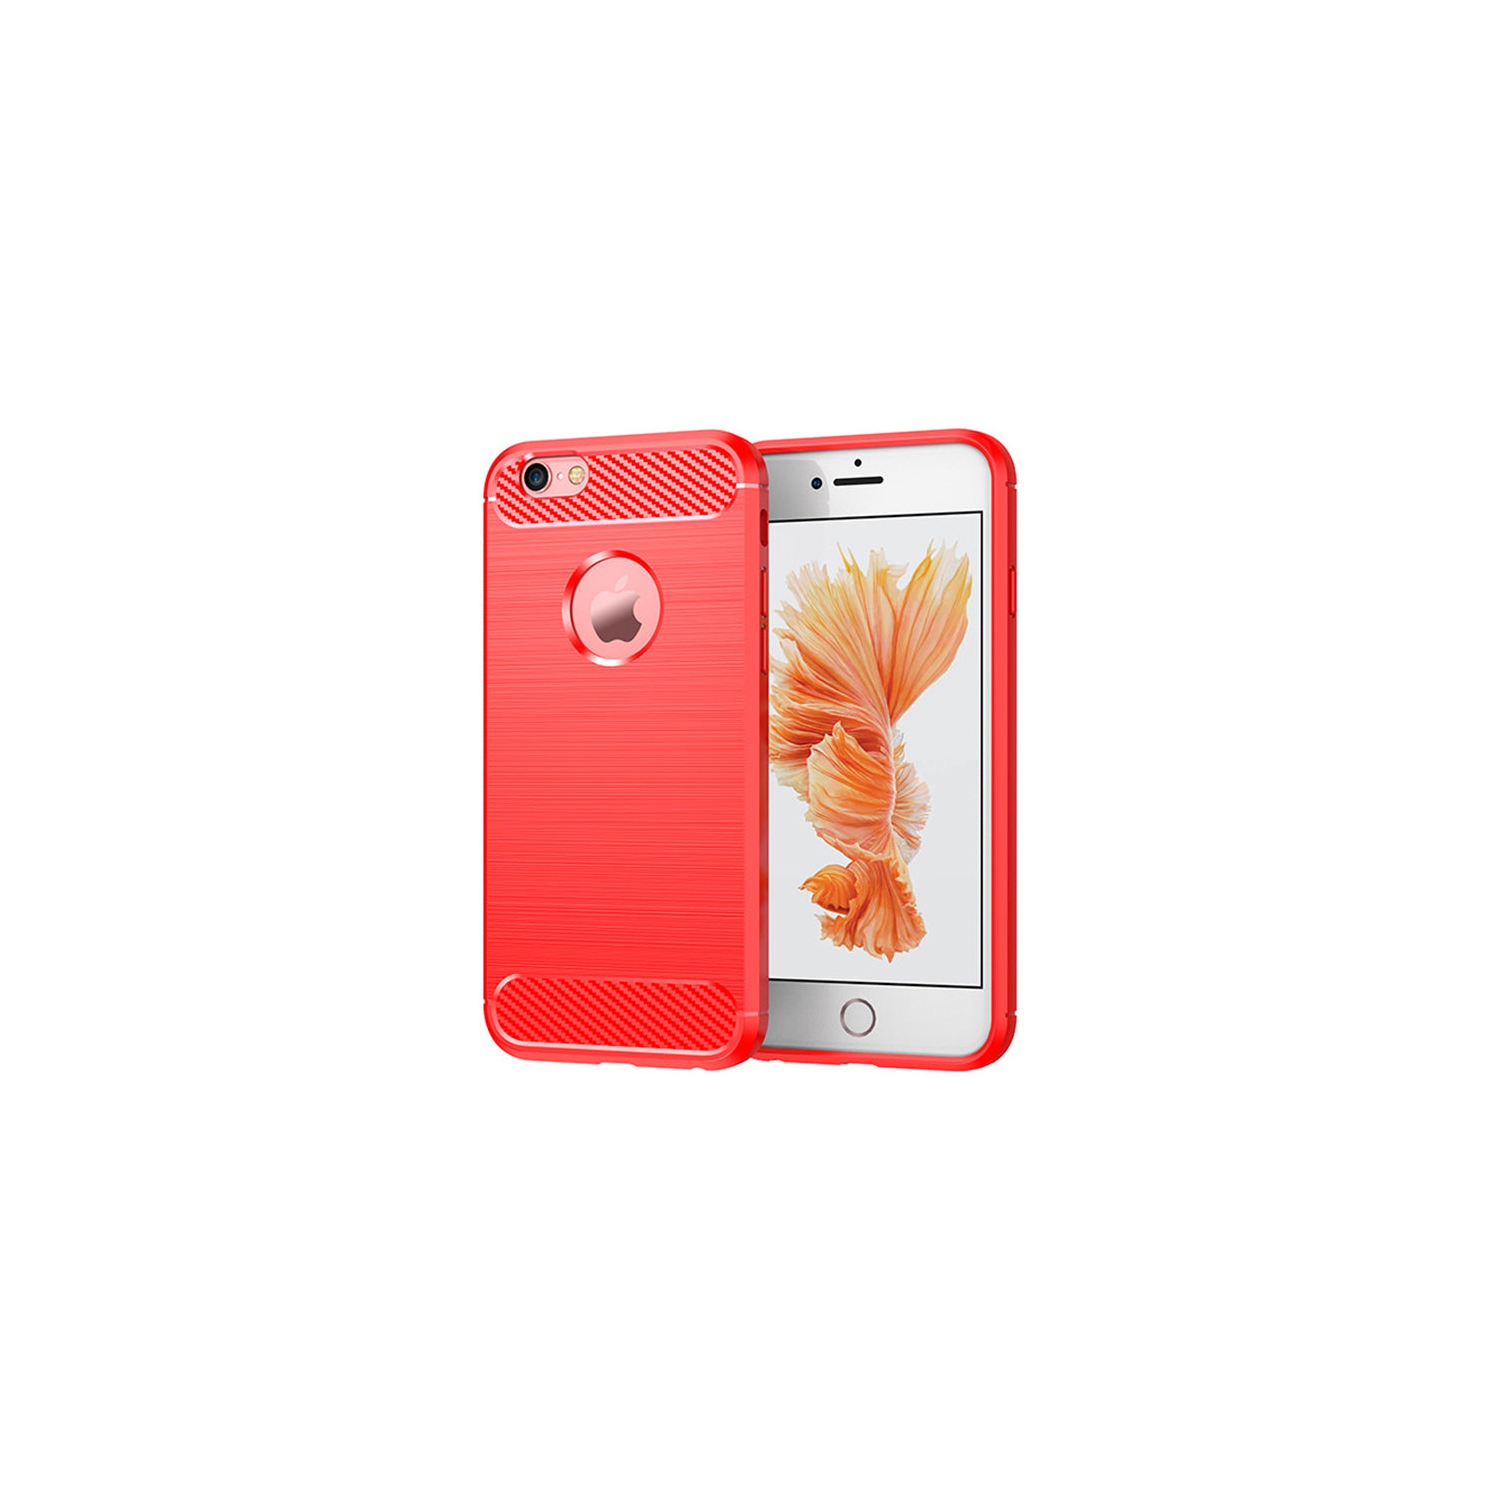 PANDACO Red Brushed Metal Case for iPhone 6 or iPhone 6S